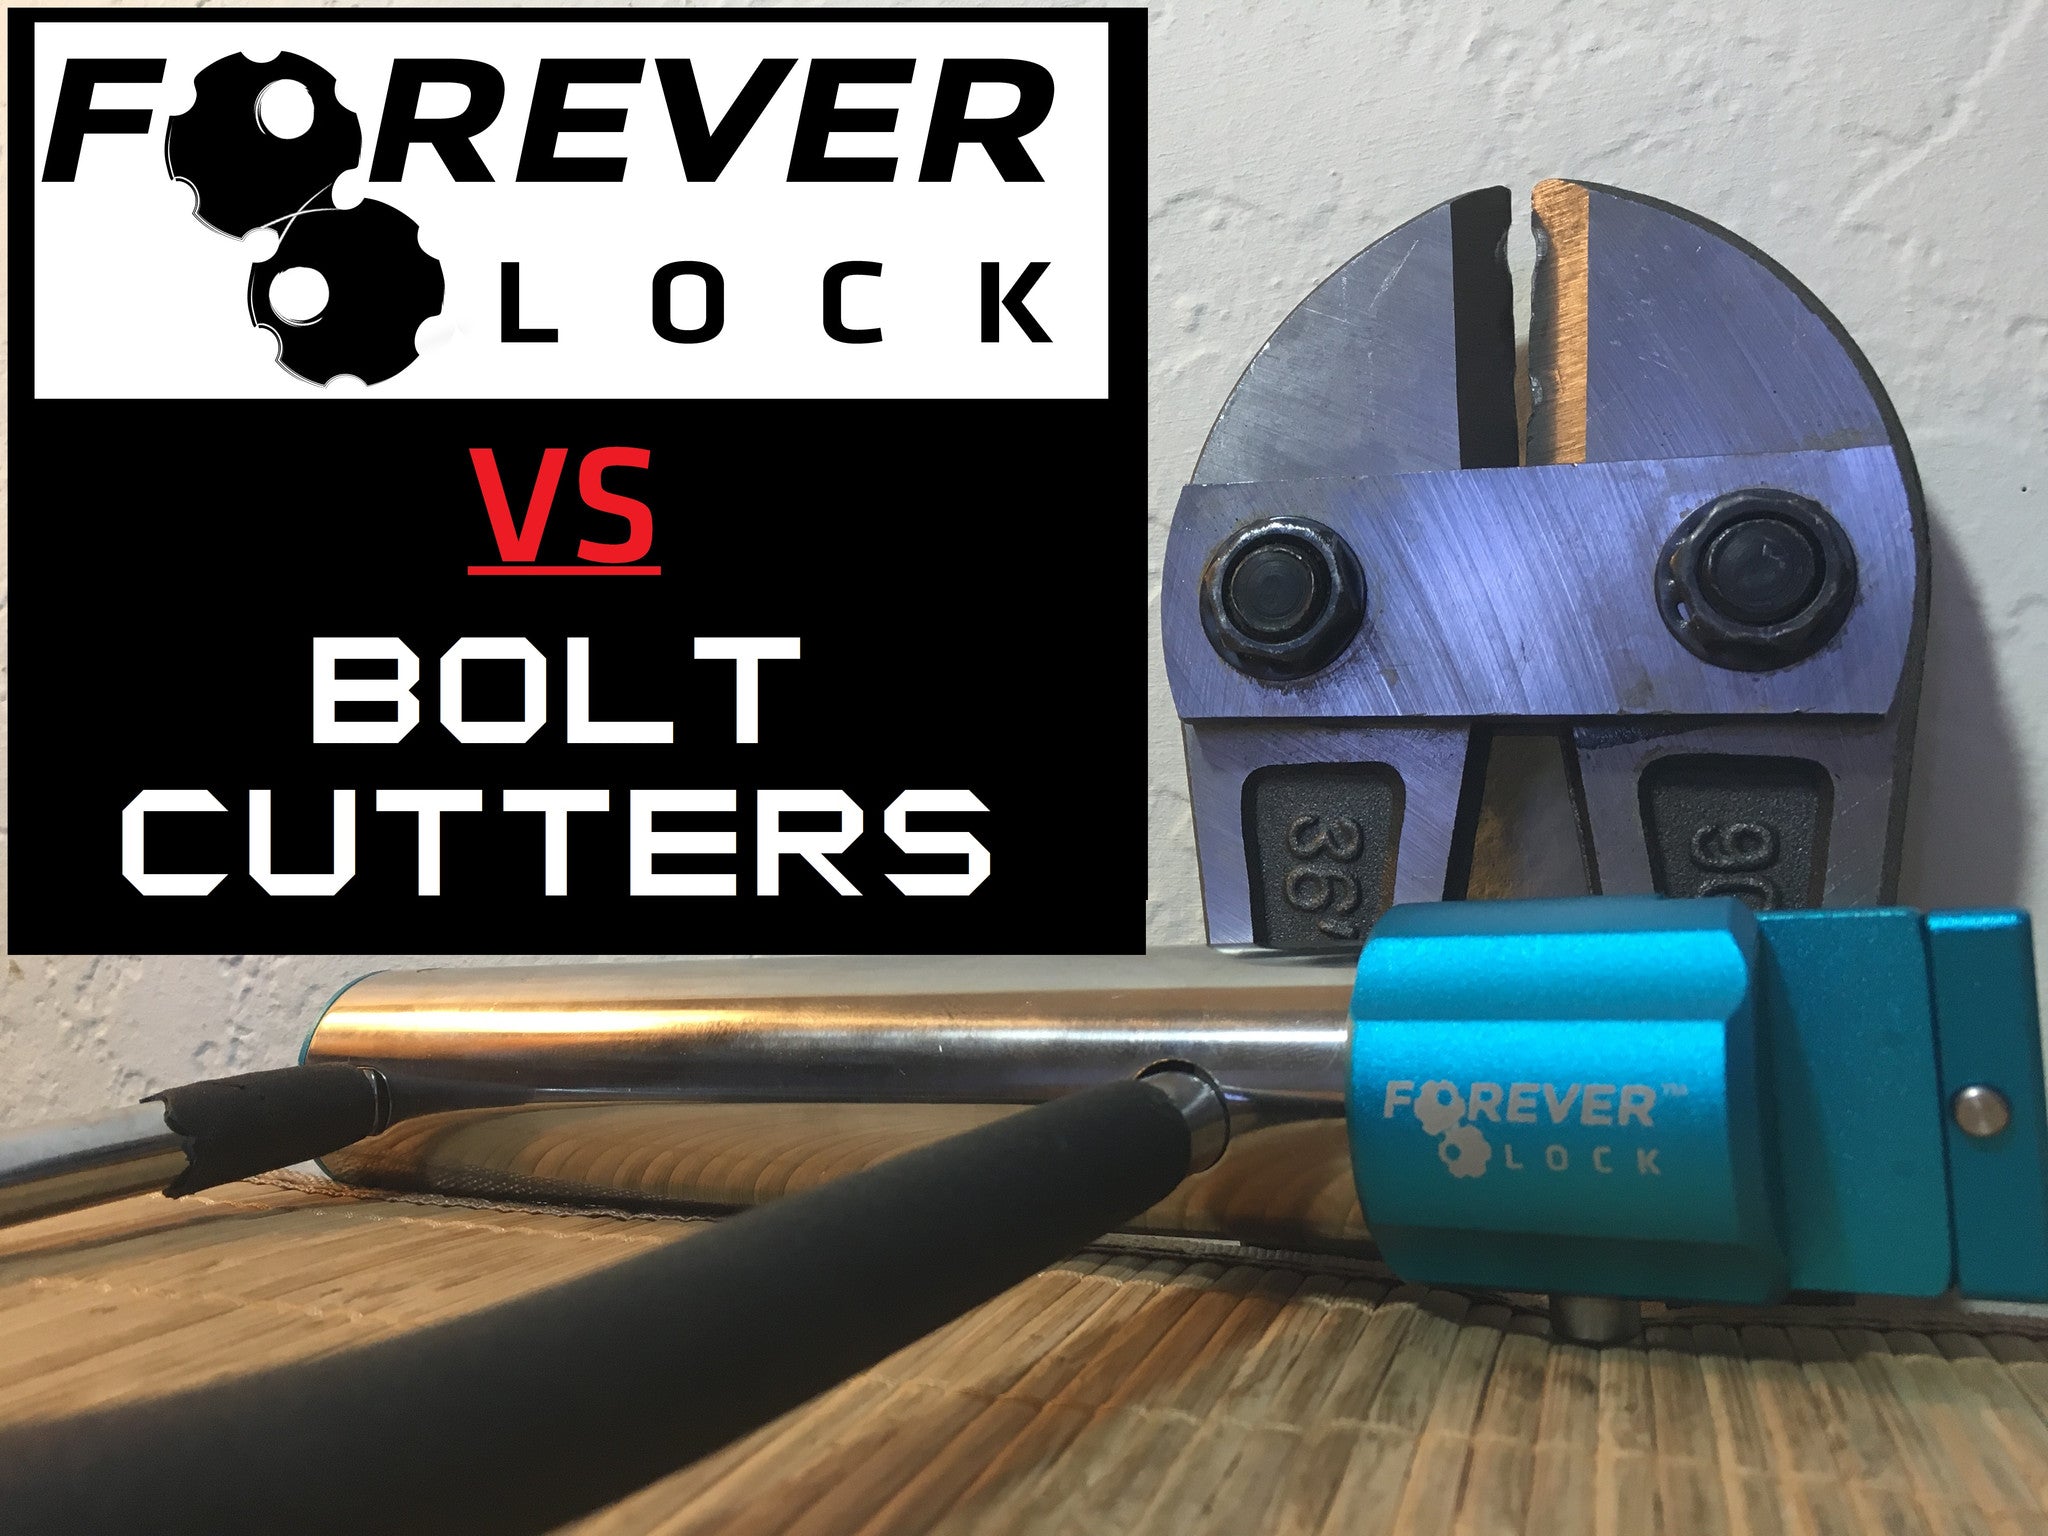 Bolt Cutters are no match for the Forever Lock!